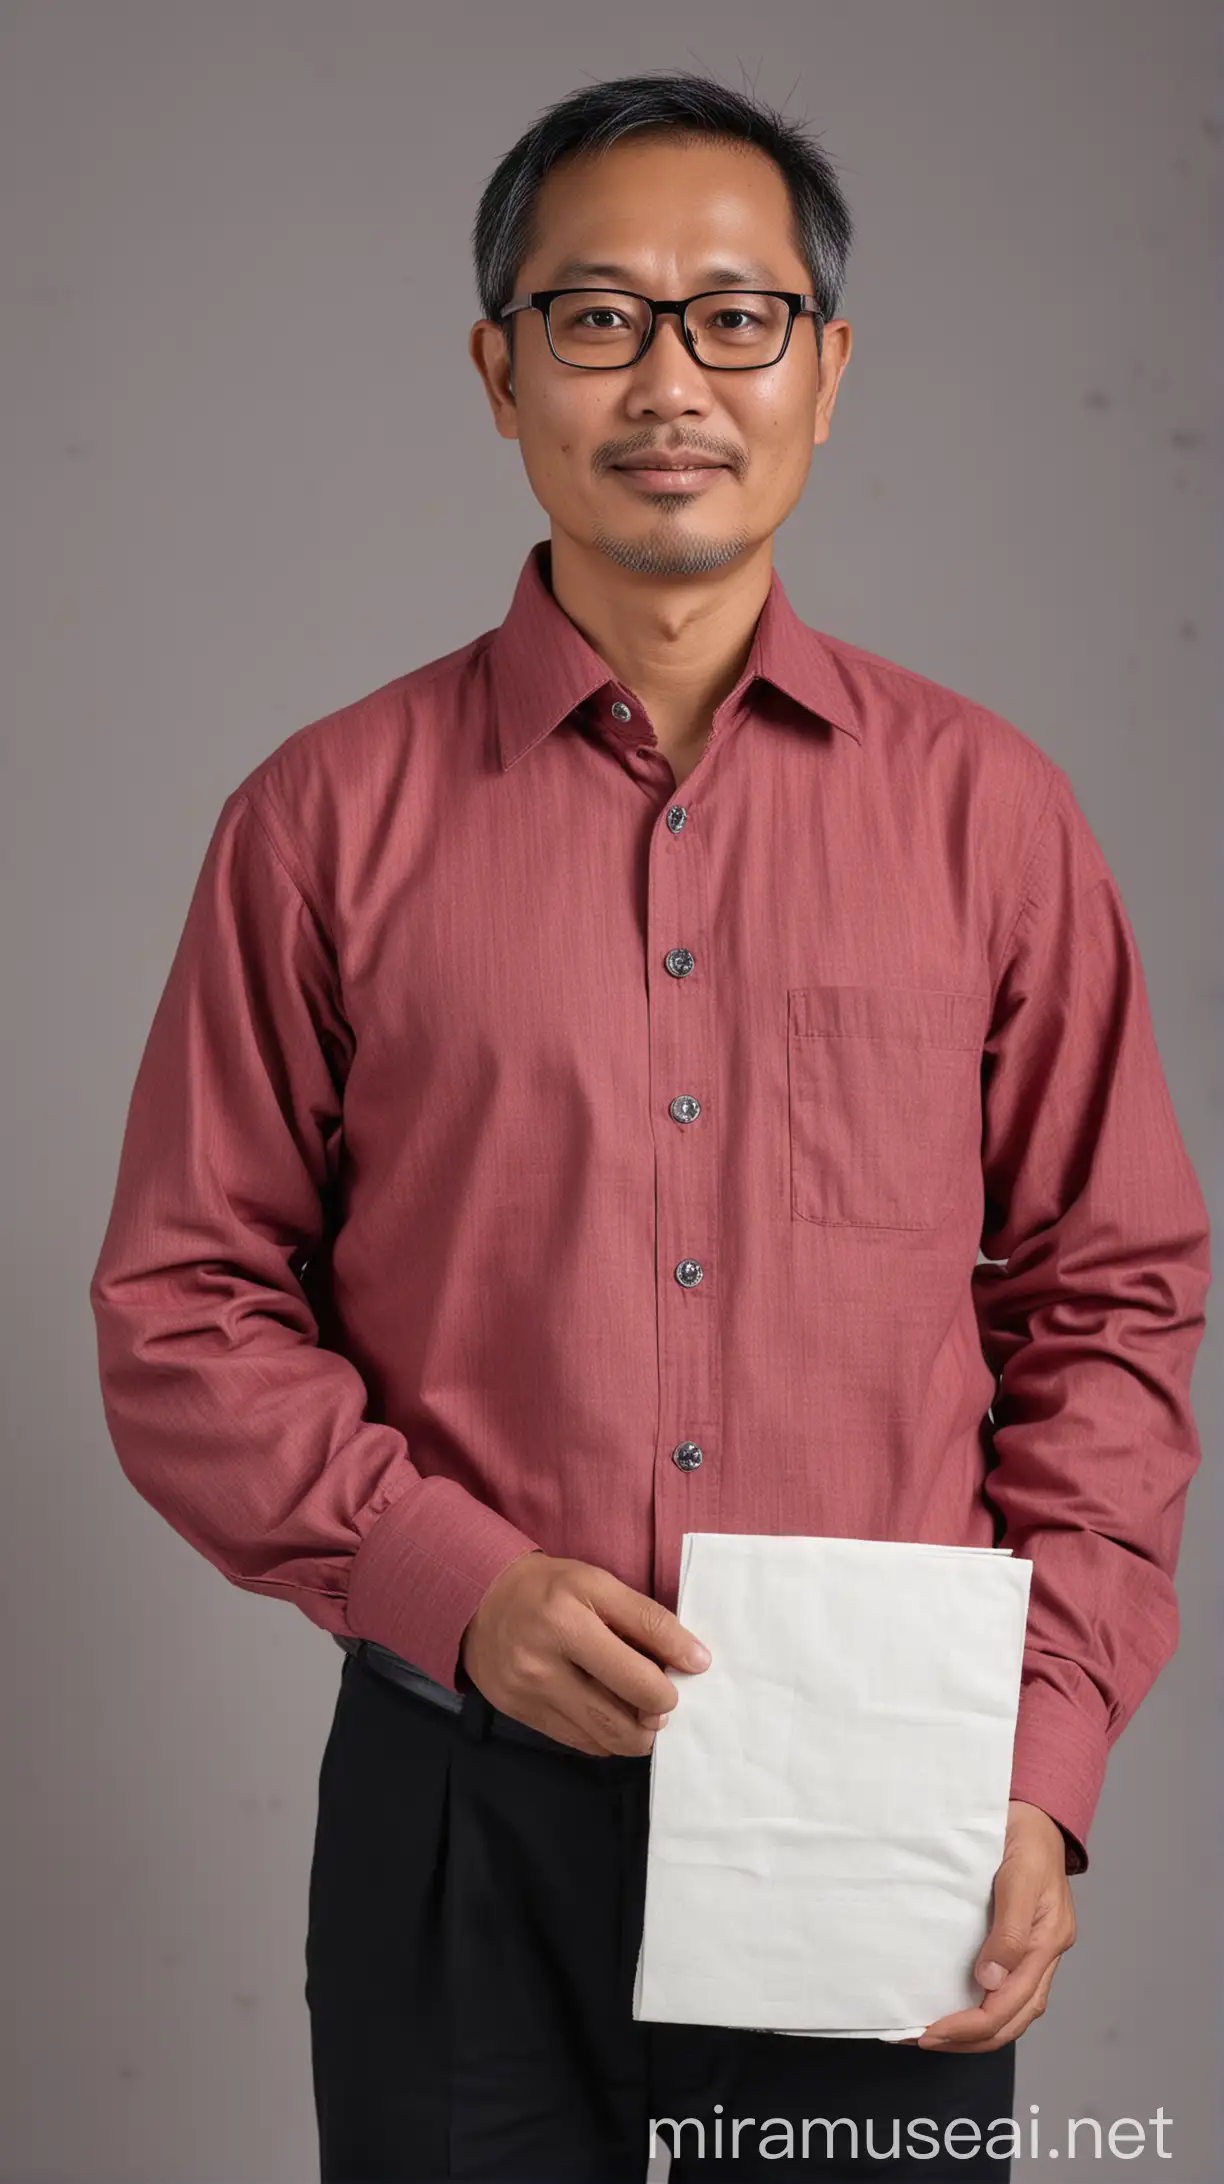 Asian Man Holding Canvas in Red Shirt and Glasses